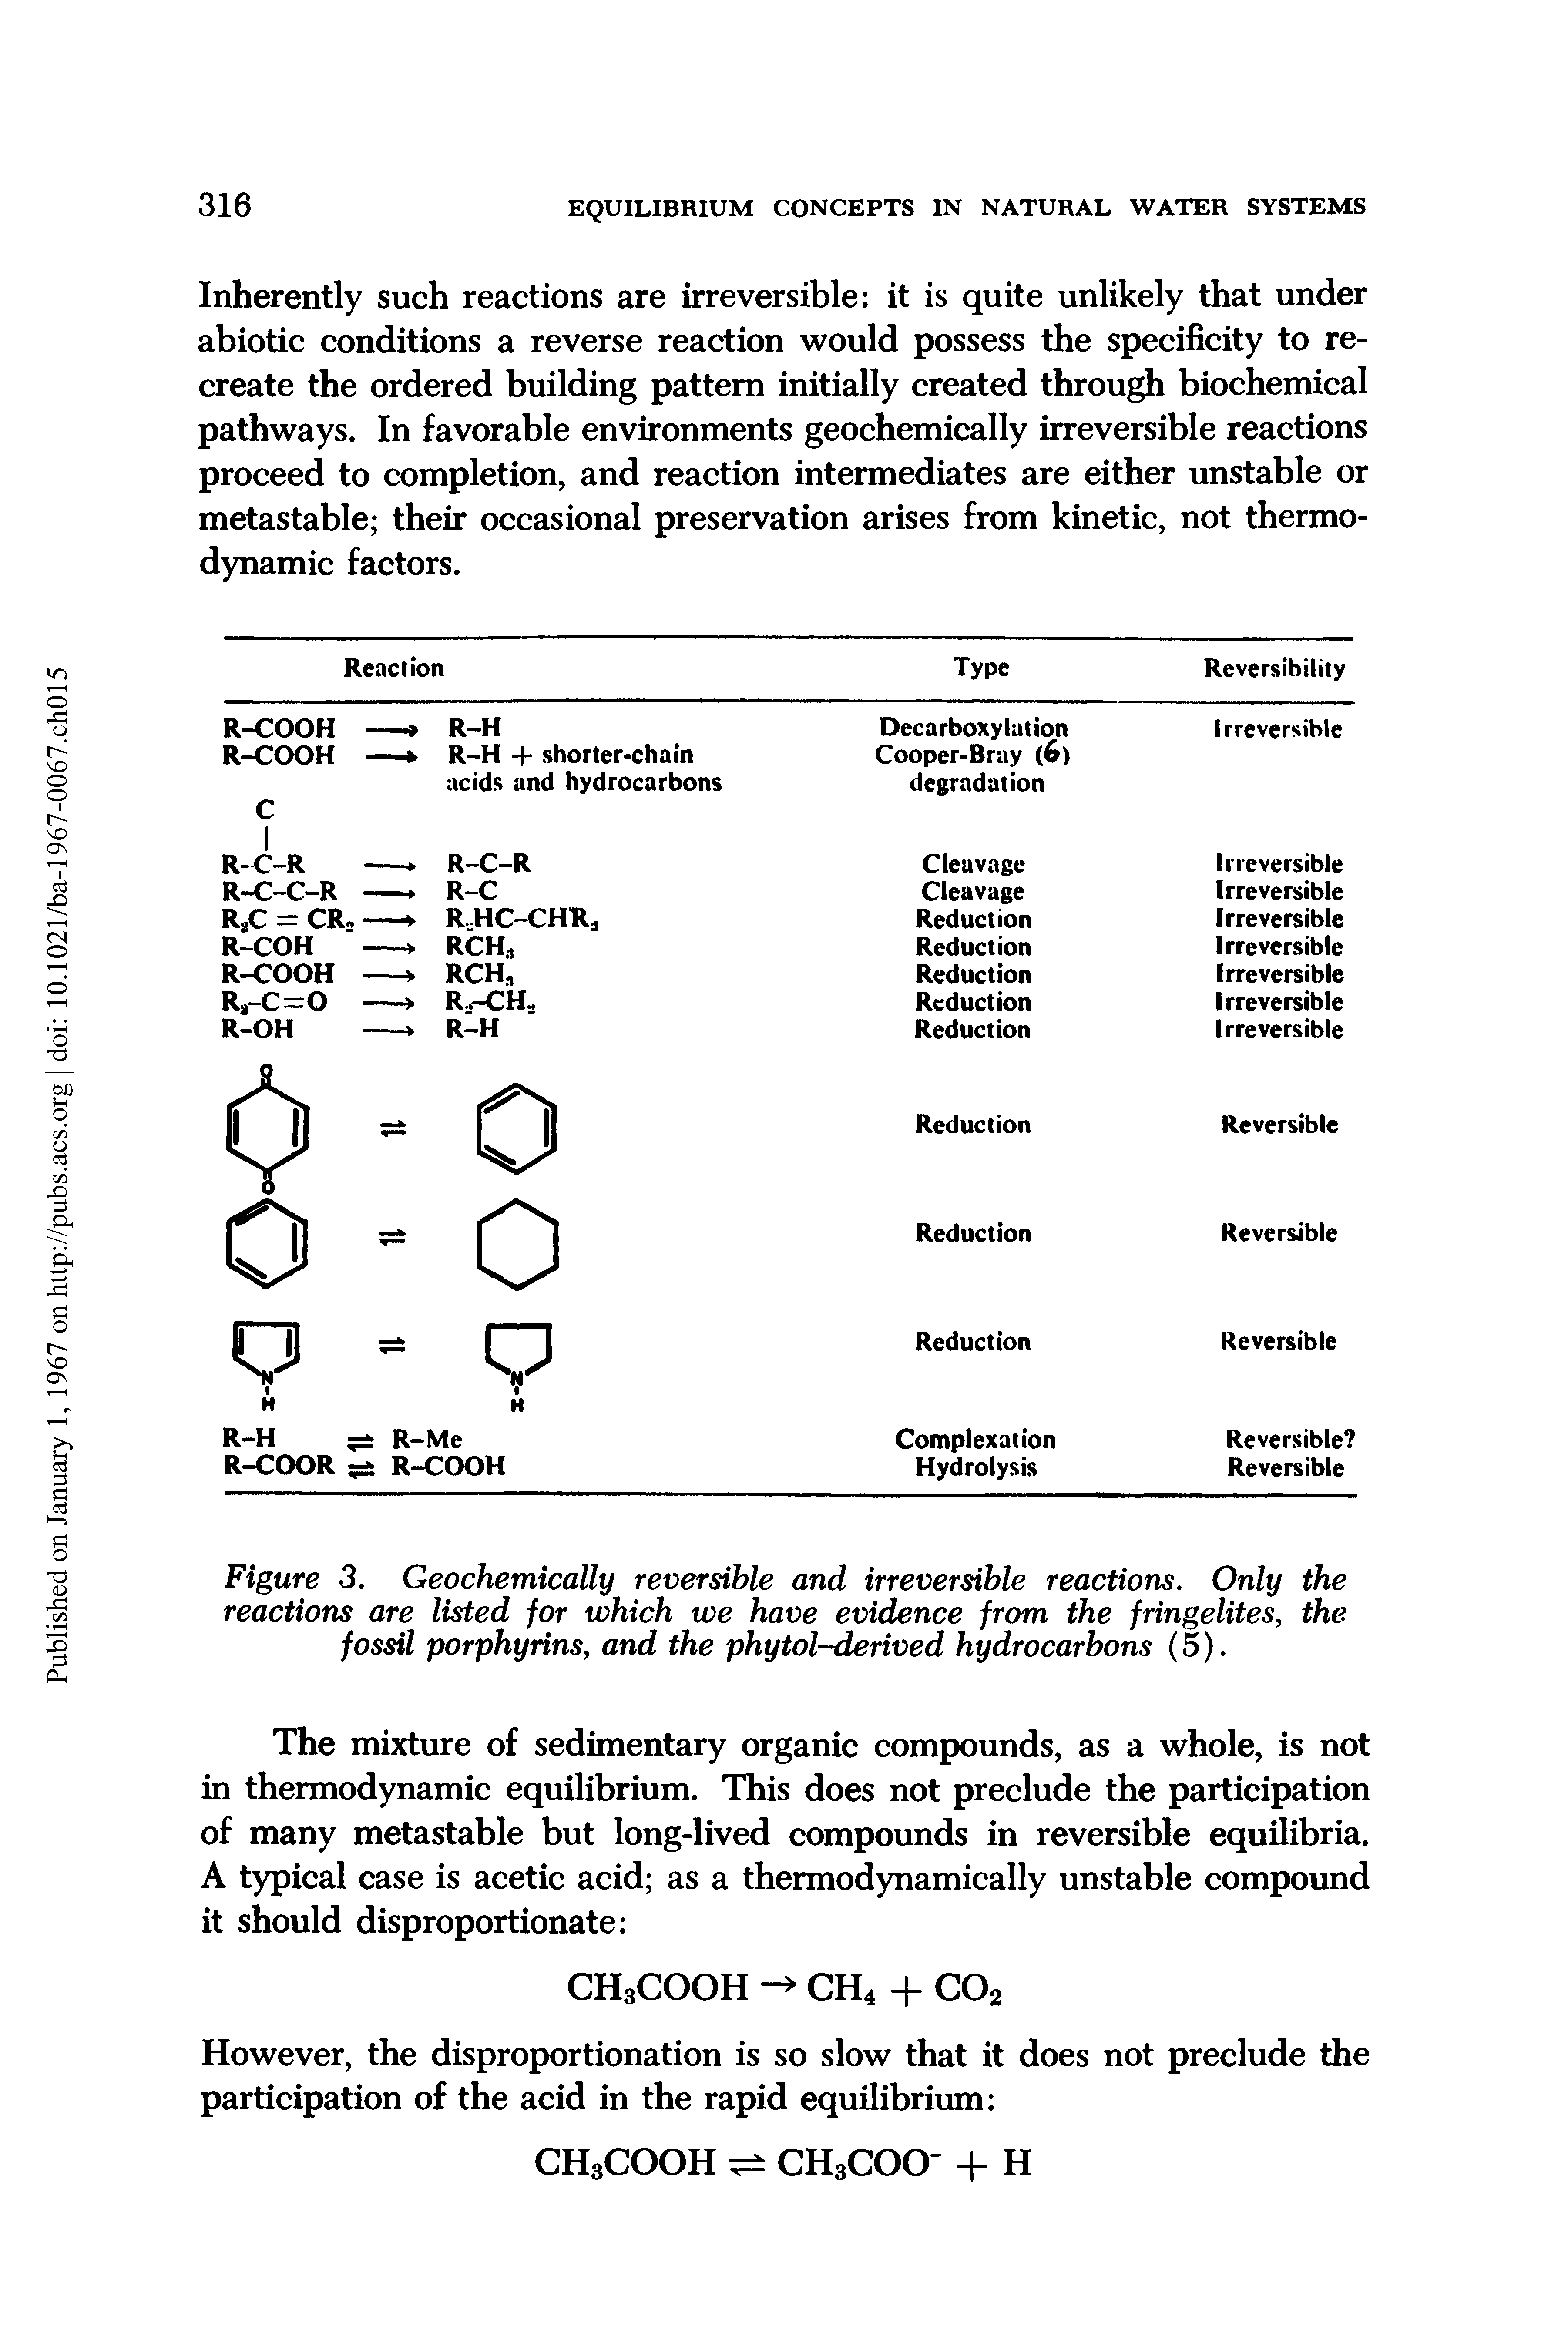 Figure 3. Geochemically reversible and irreversible reactions. Only the reactions are listed for which we have evidence from the fringelites, the fossil porphyrins, and the phytol-derived hydrocarbons (5).